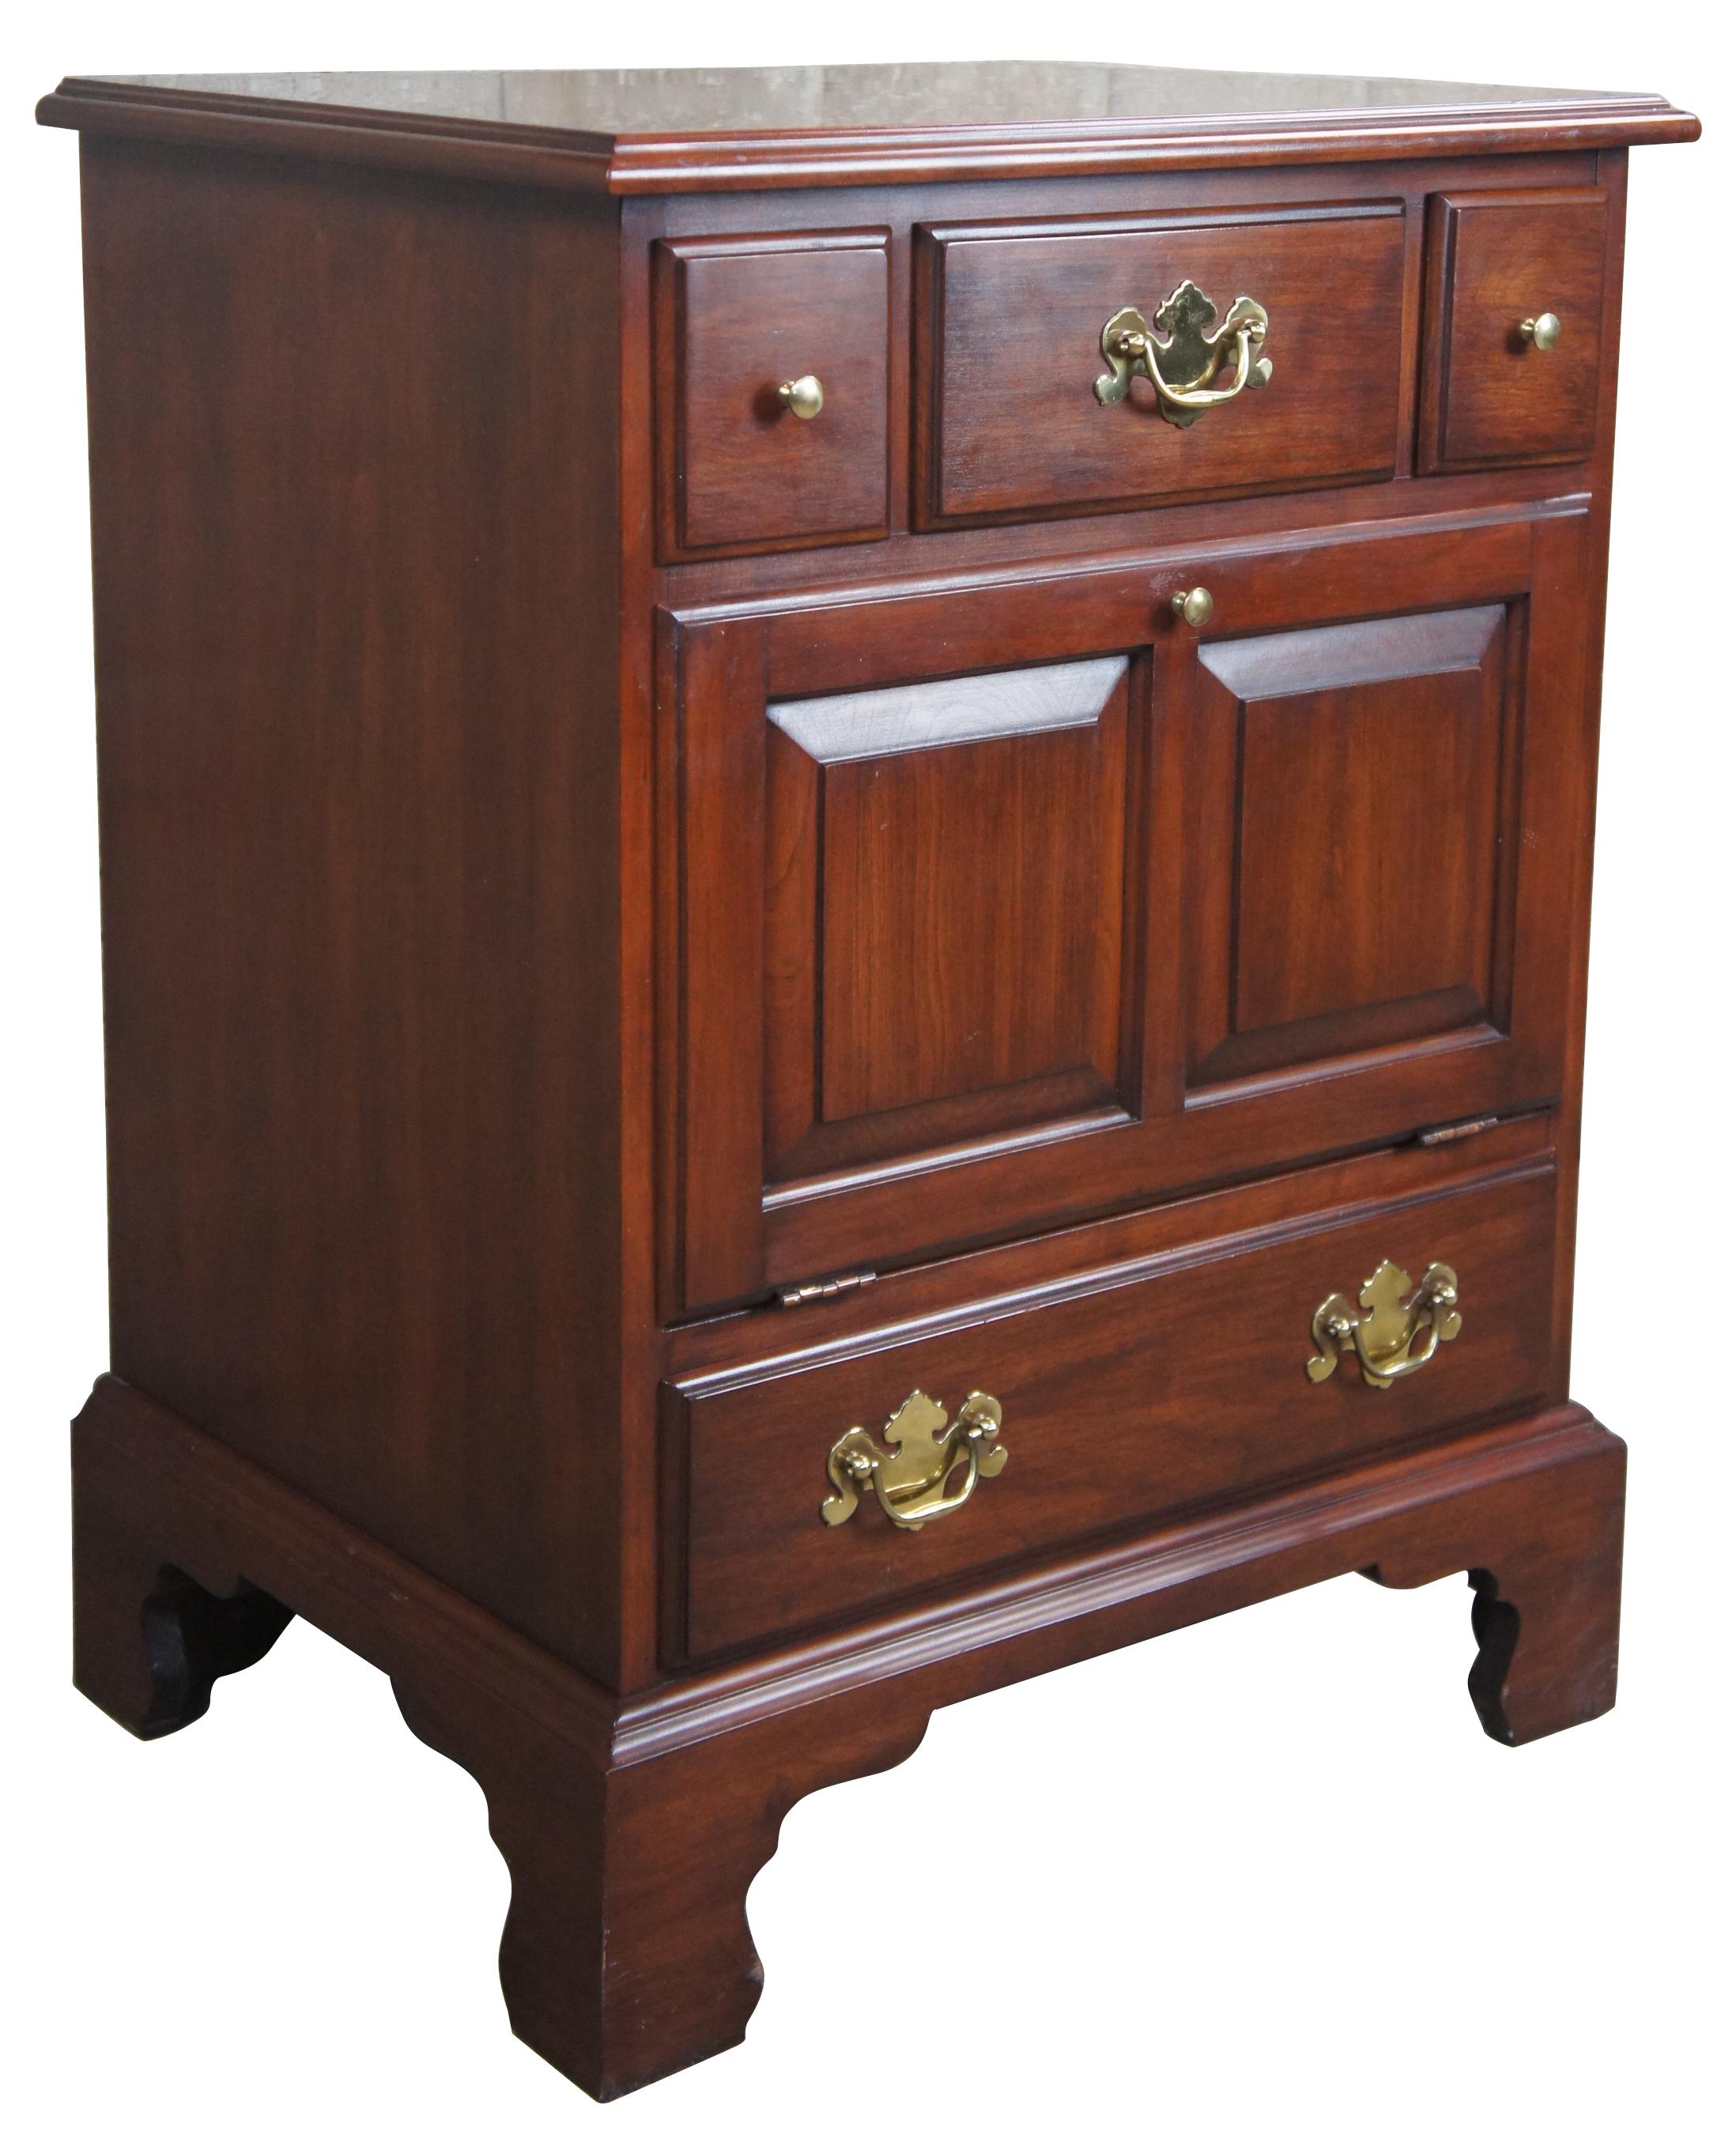 1982 Henkel Harris solid wild black cherry Chippendale McKenzie nightstand 126

Henkel Harris wild black cherry McKenzie nightstand or chest, circa 1982. Chippendale style with brass hardware and block feet. Finish #24, style #126, from shop